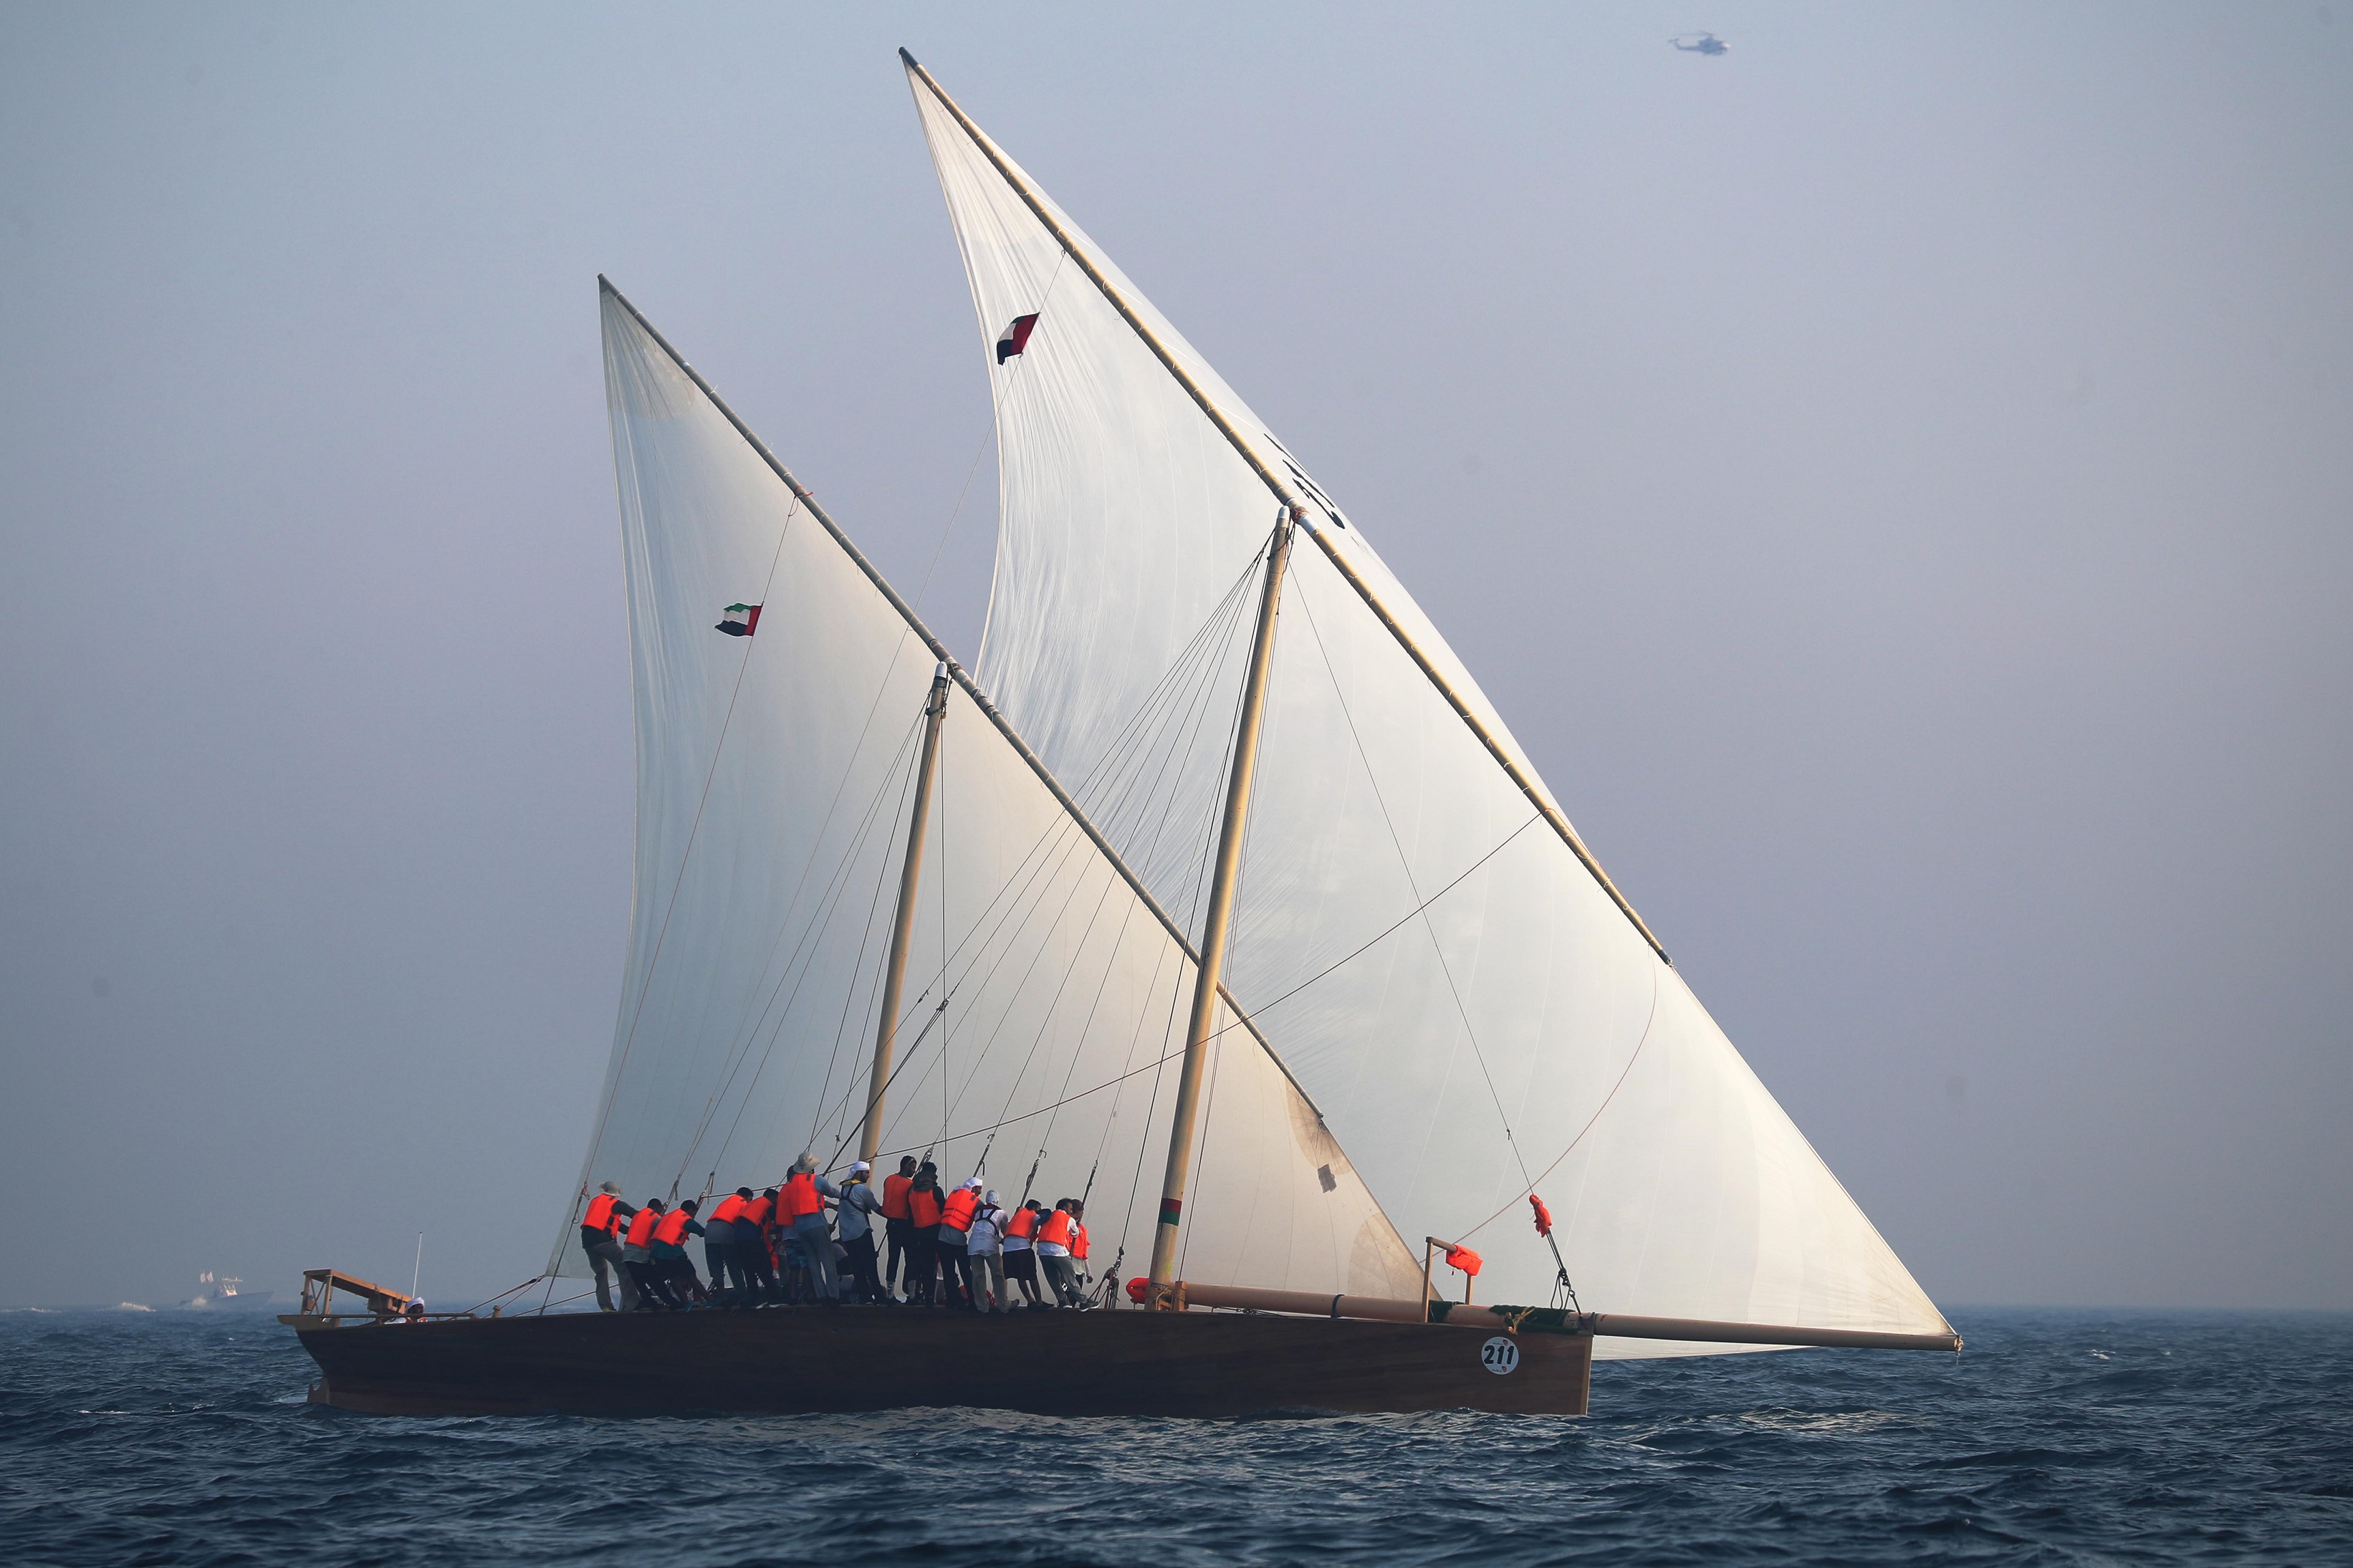 3-5 June is the new date for the 31st Al Gaffal